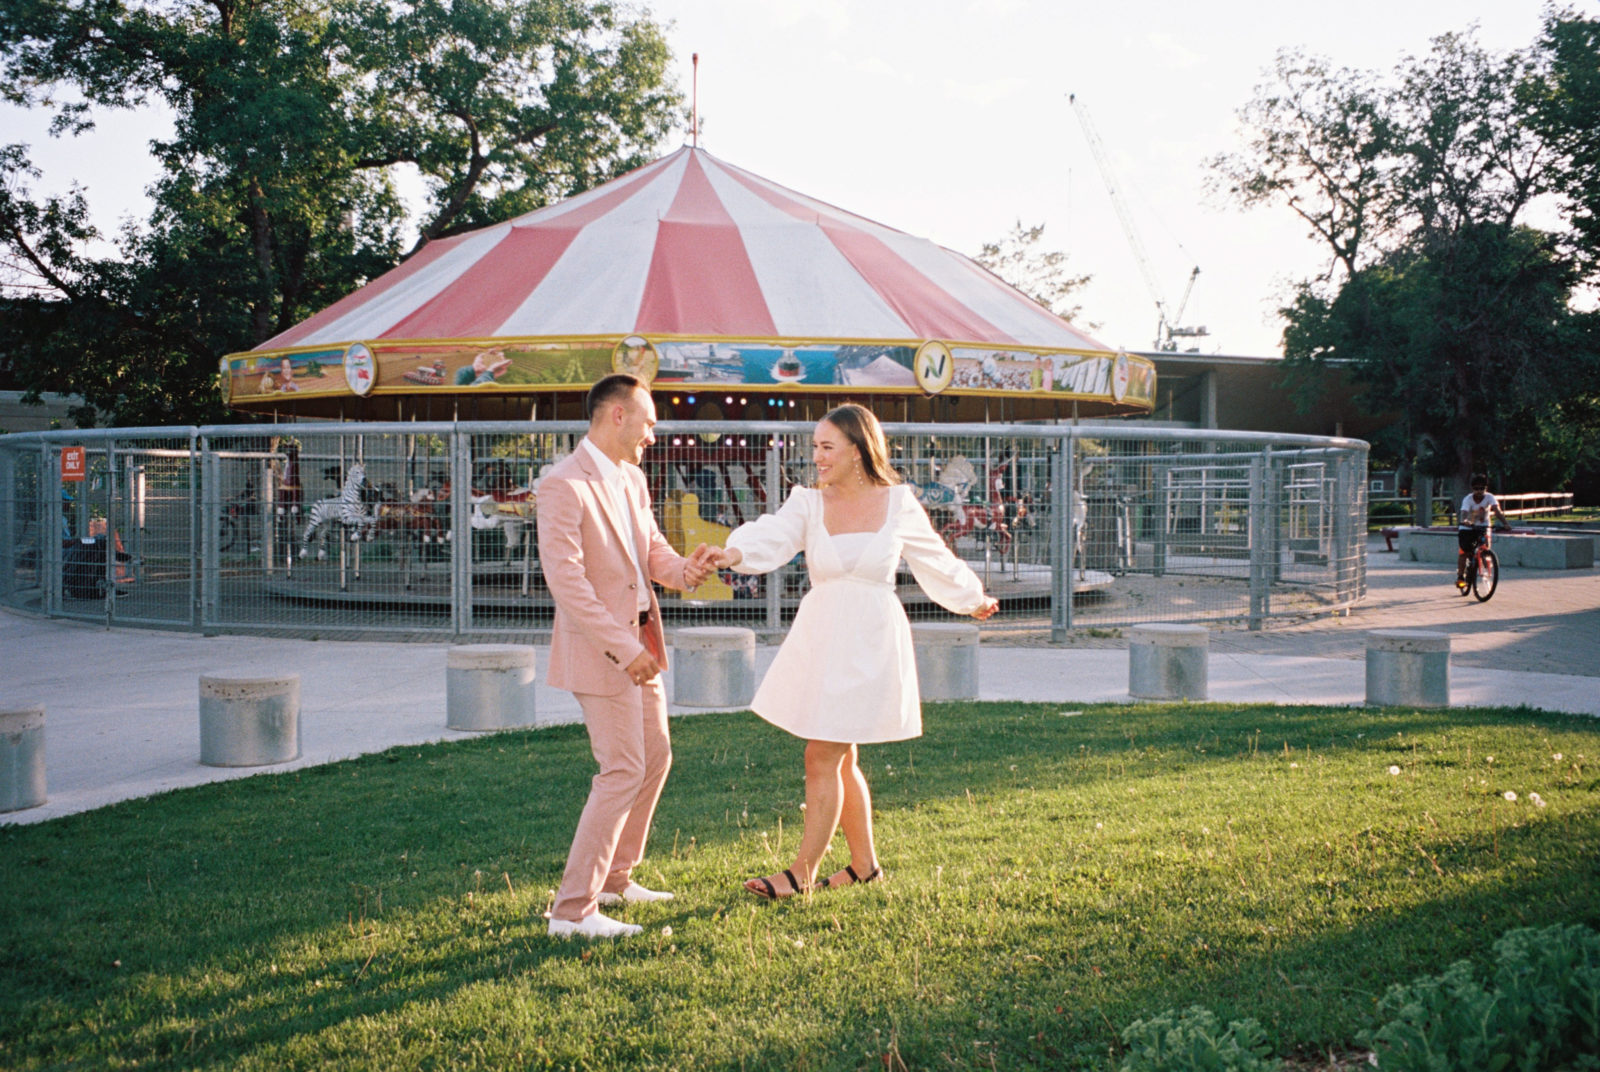 Wonderfully Whimsical Engagement Session at a Colourful Summer Carnival | Bronte Bride